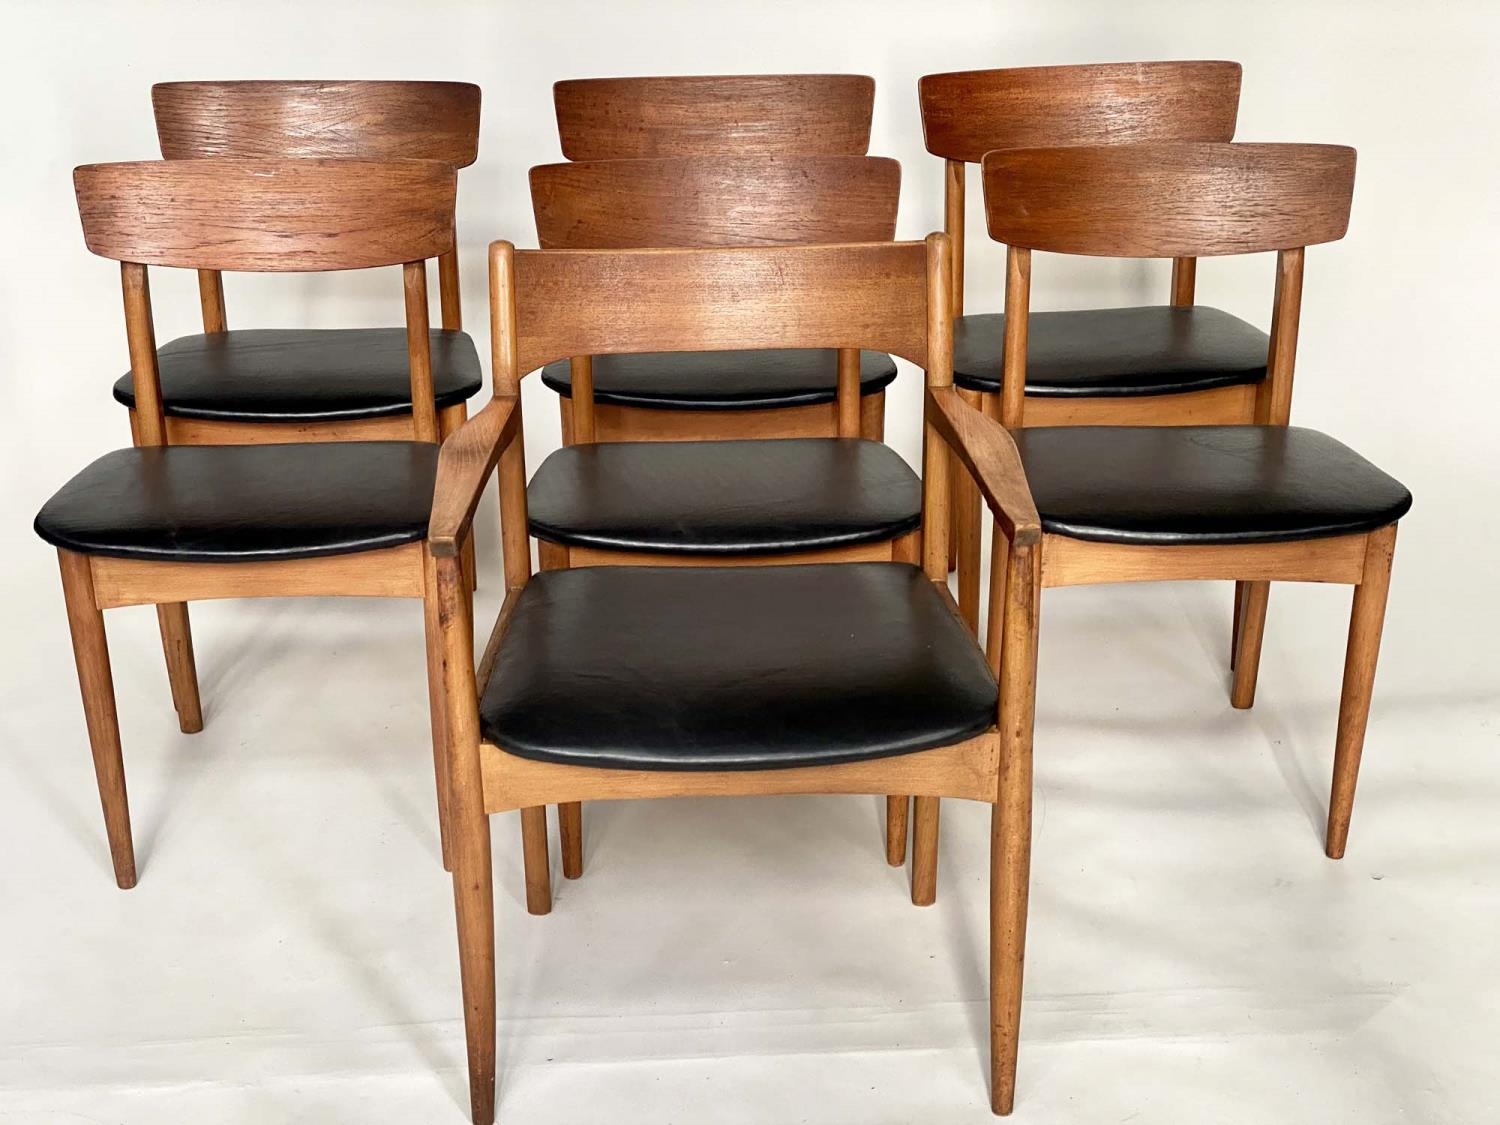 DINING CHAIRS, a set of seven, 1970's teak Danish style with black leather seats and carved backs